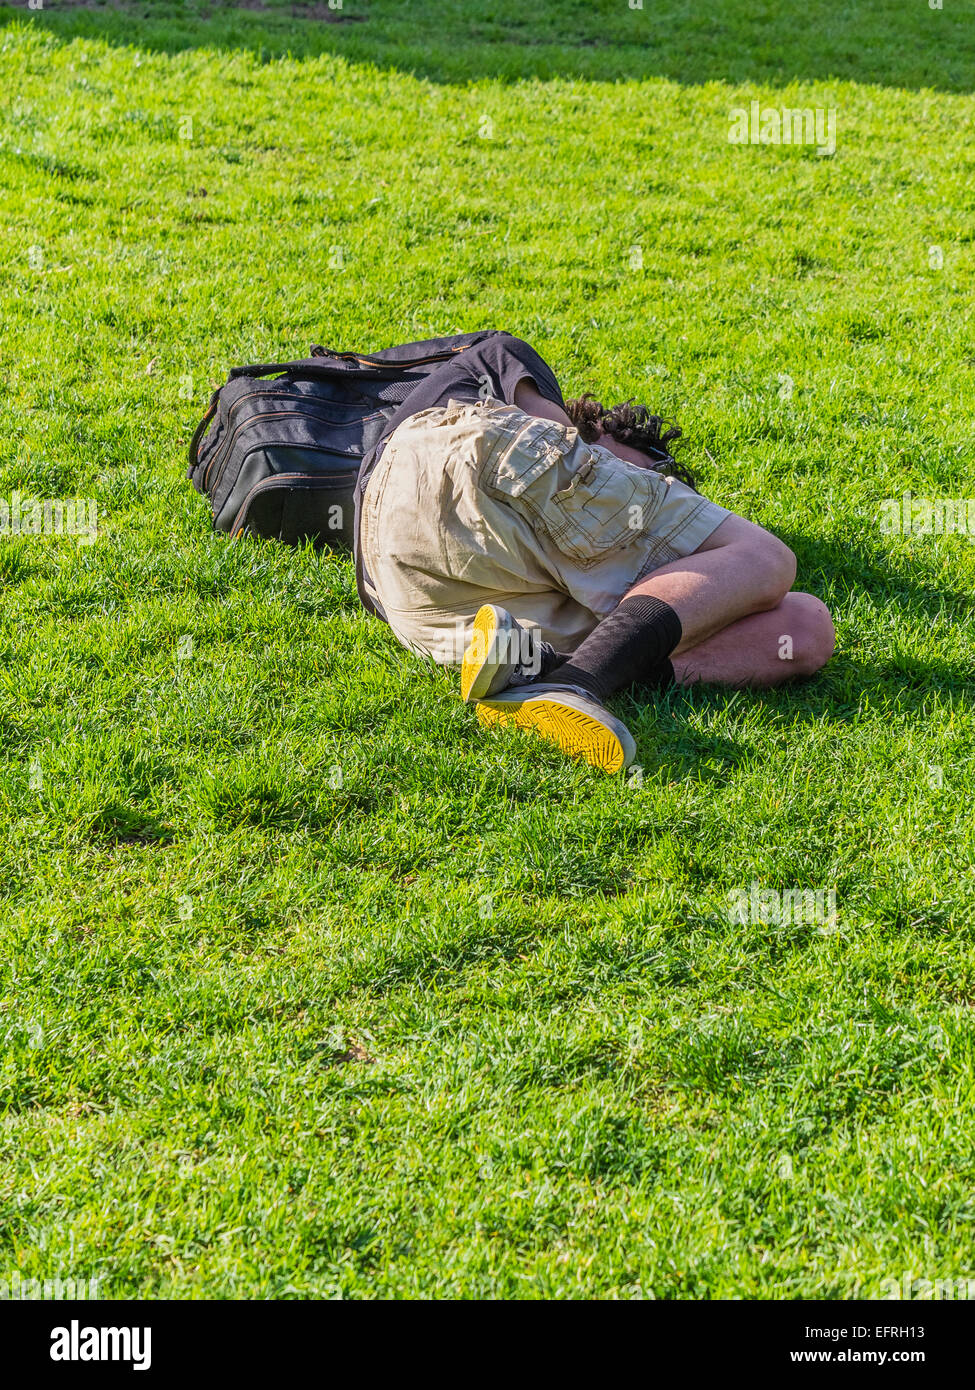 A young homeless man with bright yellow soles on his shoes sleeps lying down outside on the green grass. Stock Photo